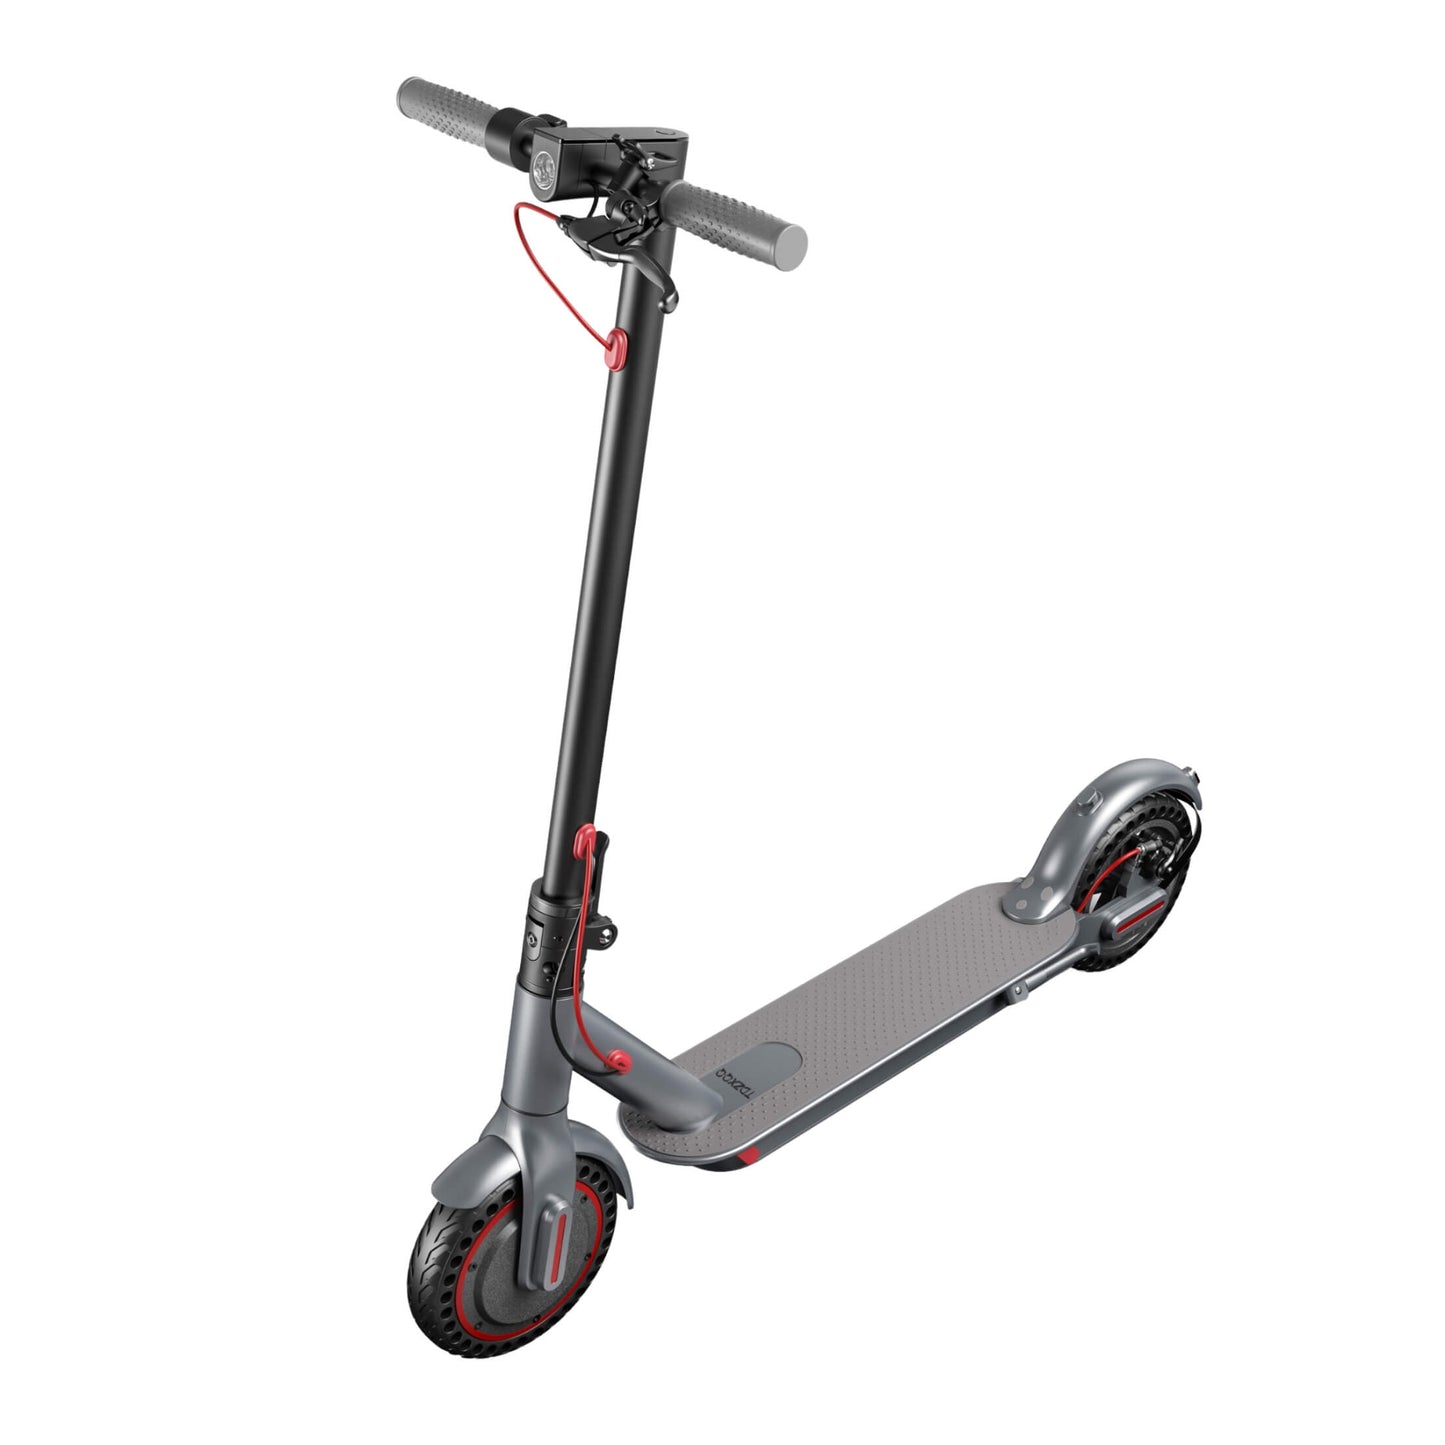 Emoko T4 PRO 350W Foldable Electric Scooter for Adults, 8.5 inch Tires up to 21 mph 20 Miles Range